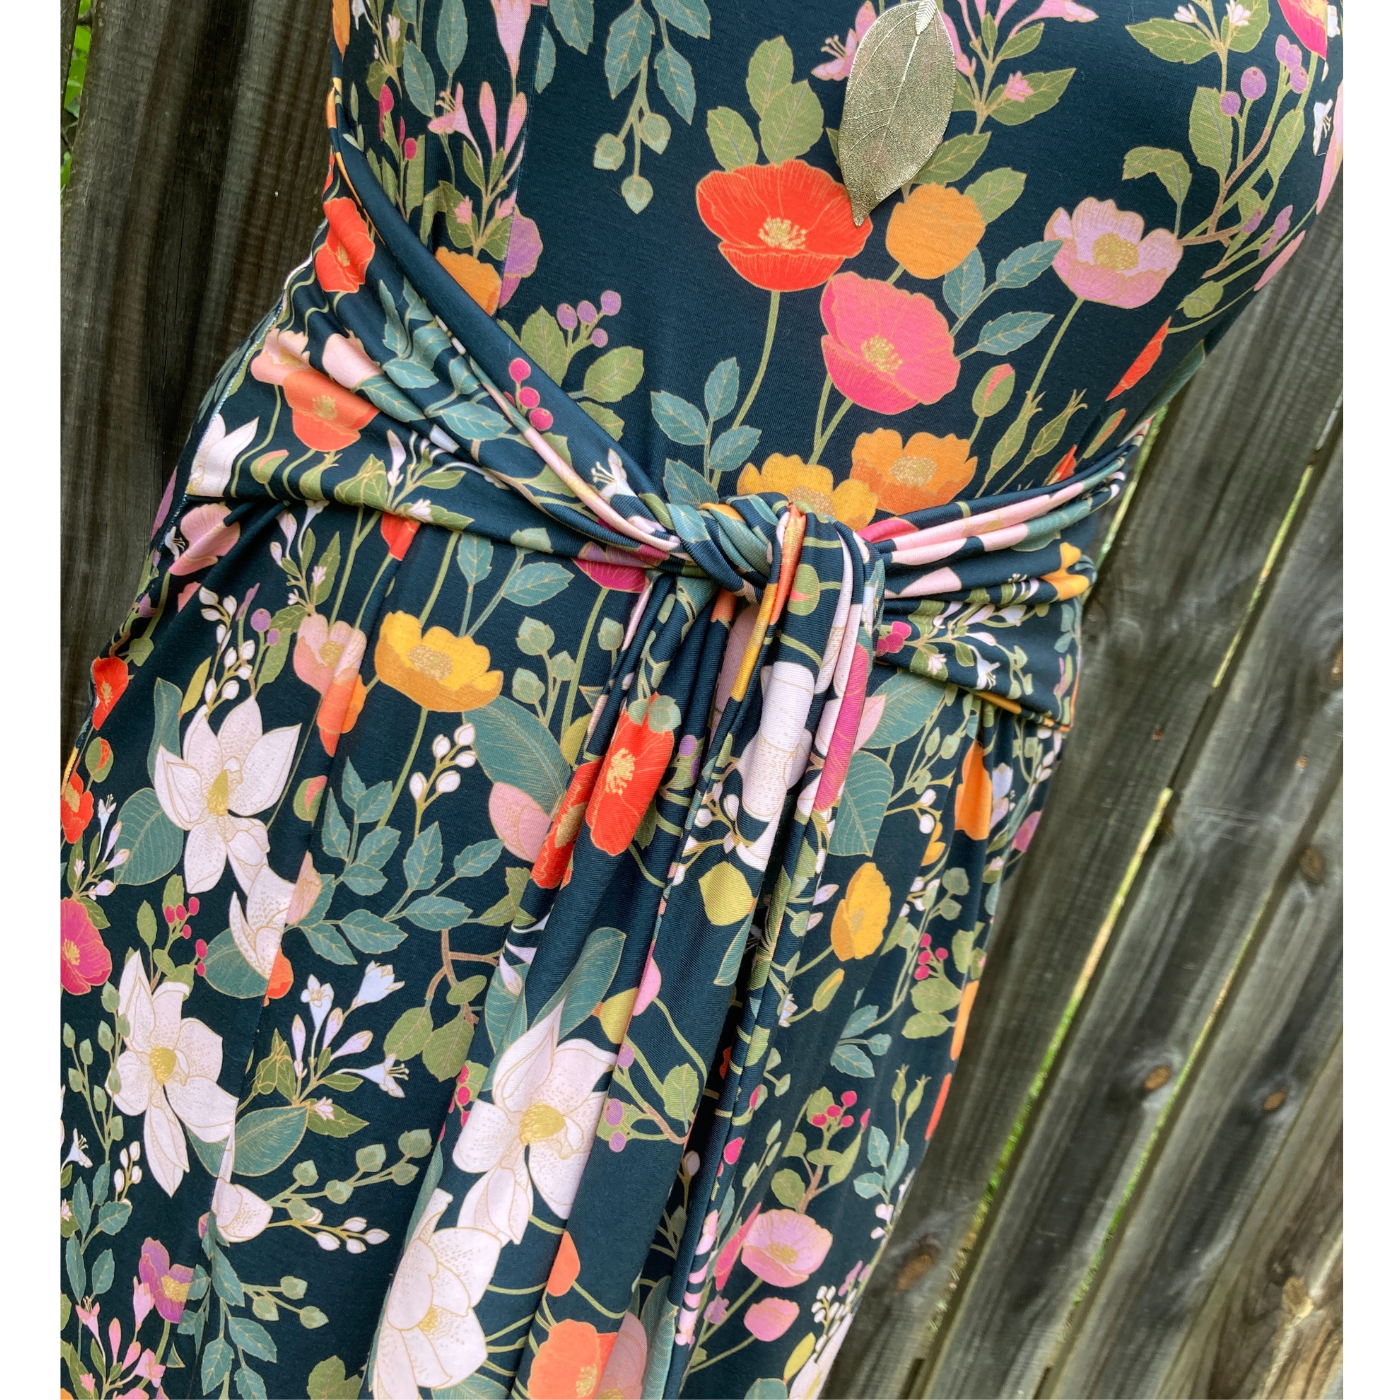 A close up of the mid-section of a dress with two thin fabric strips that tie in the front. The fabric has a black background and a floral print with orange, yellow and pink poppies and green flowers around them.